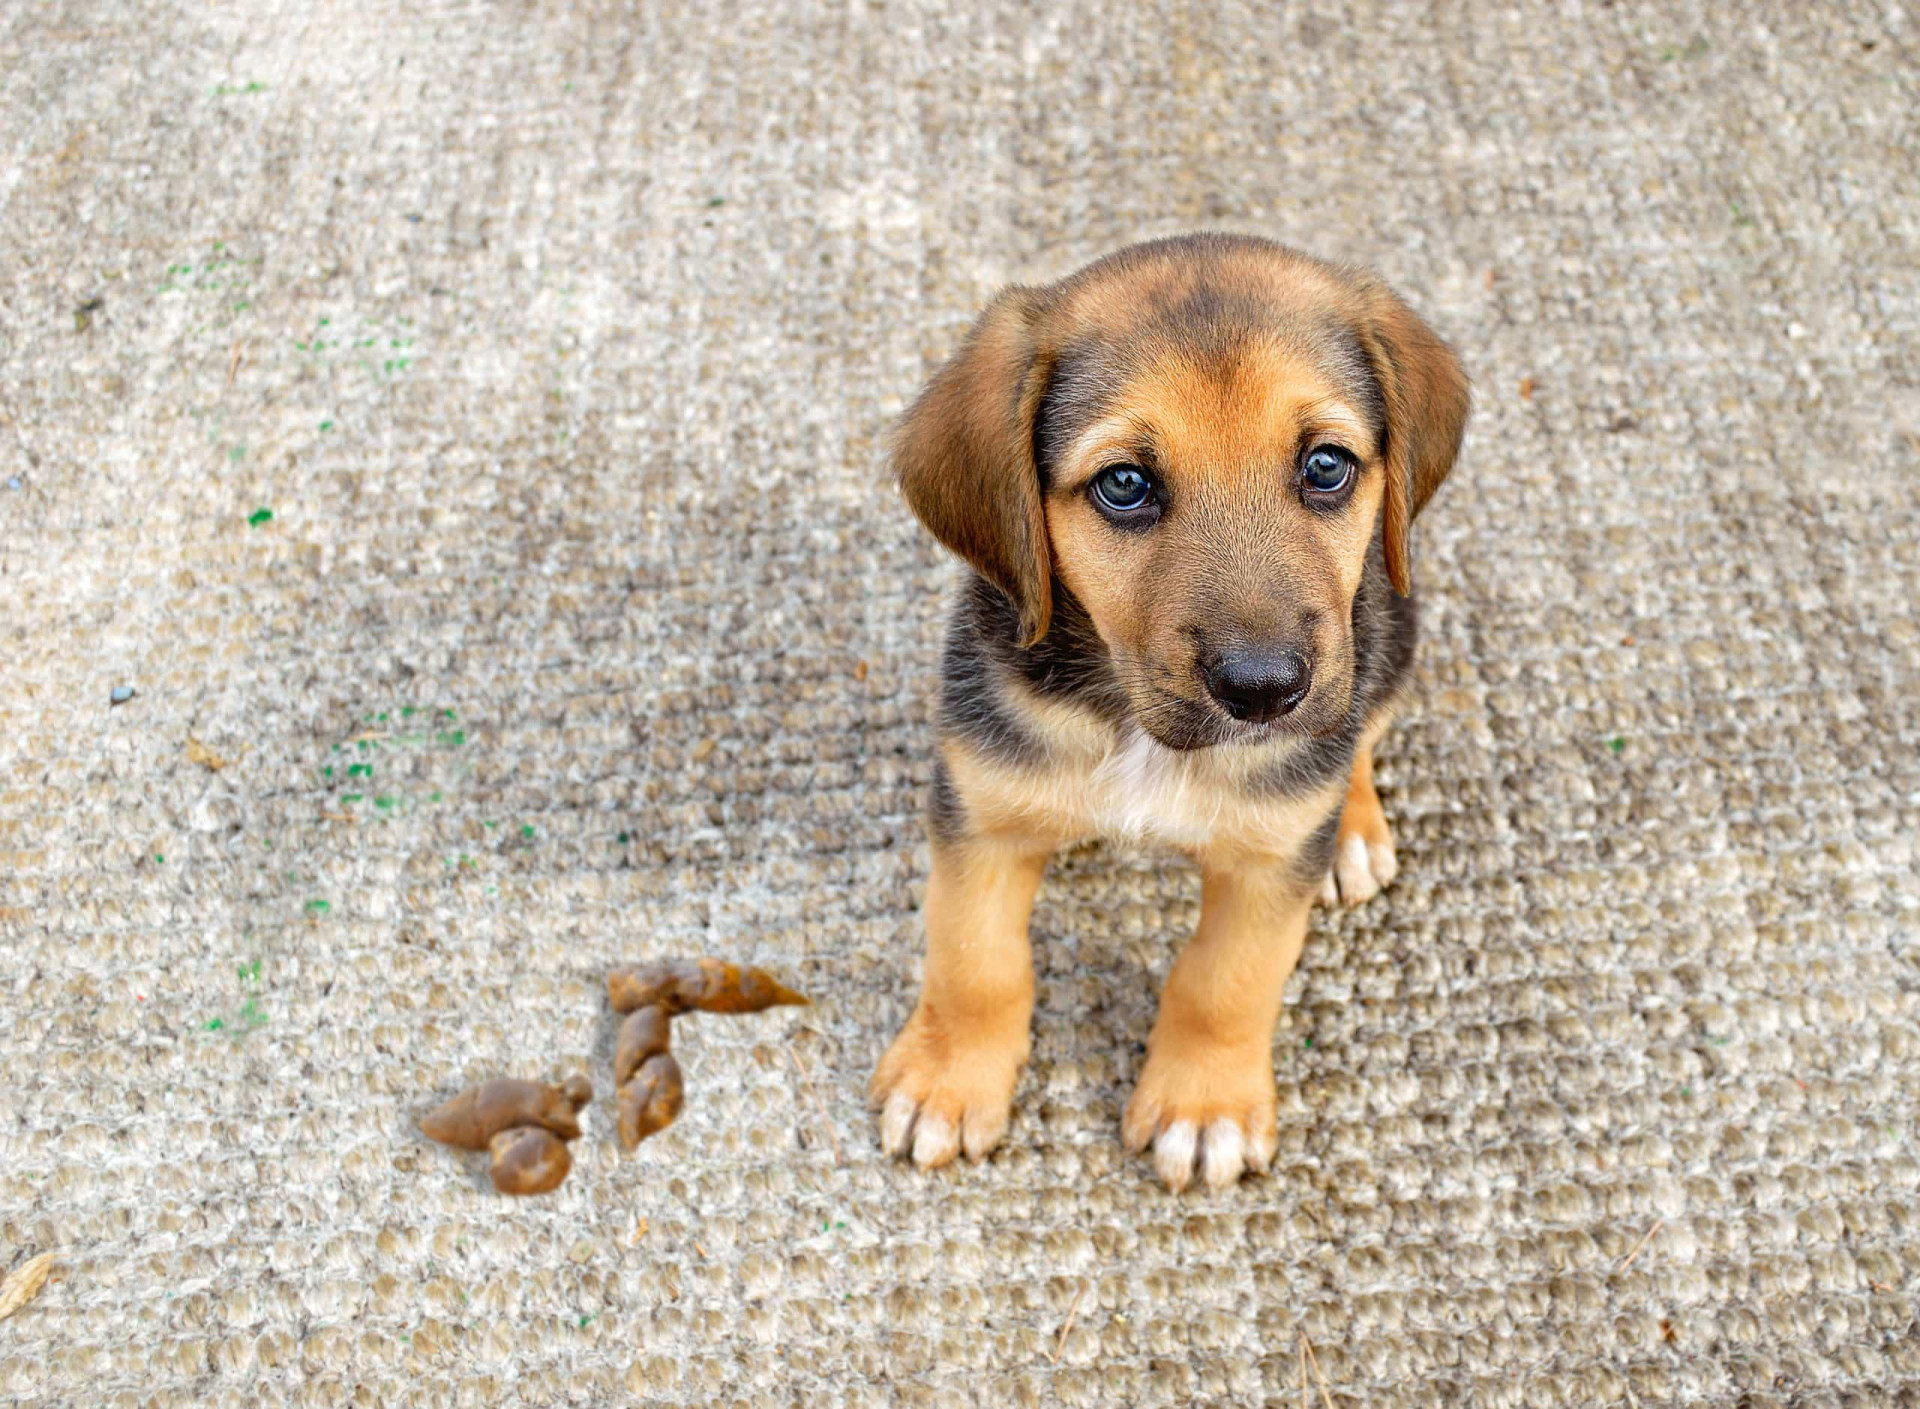 The most common mistakes dog owners make